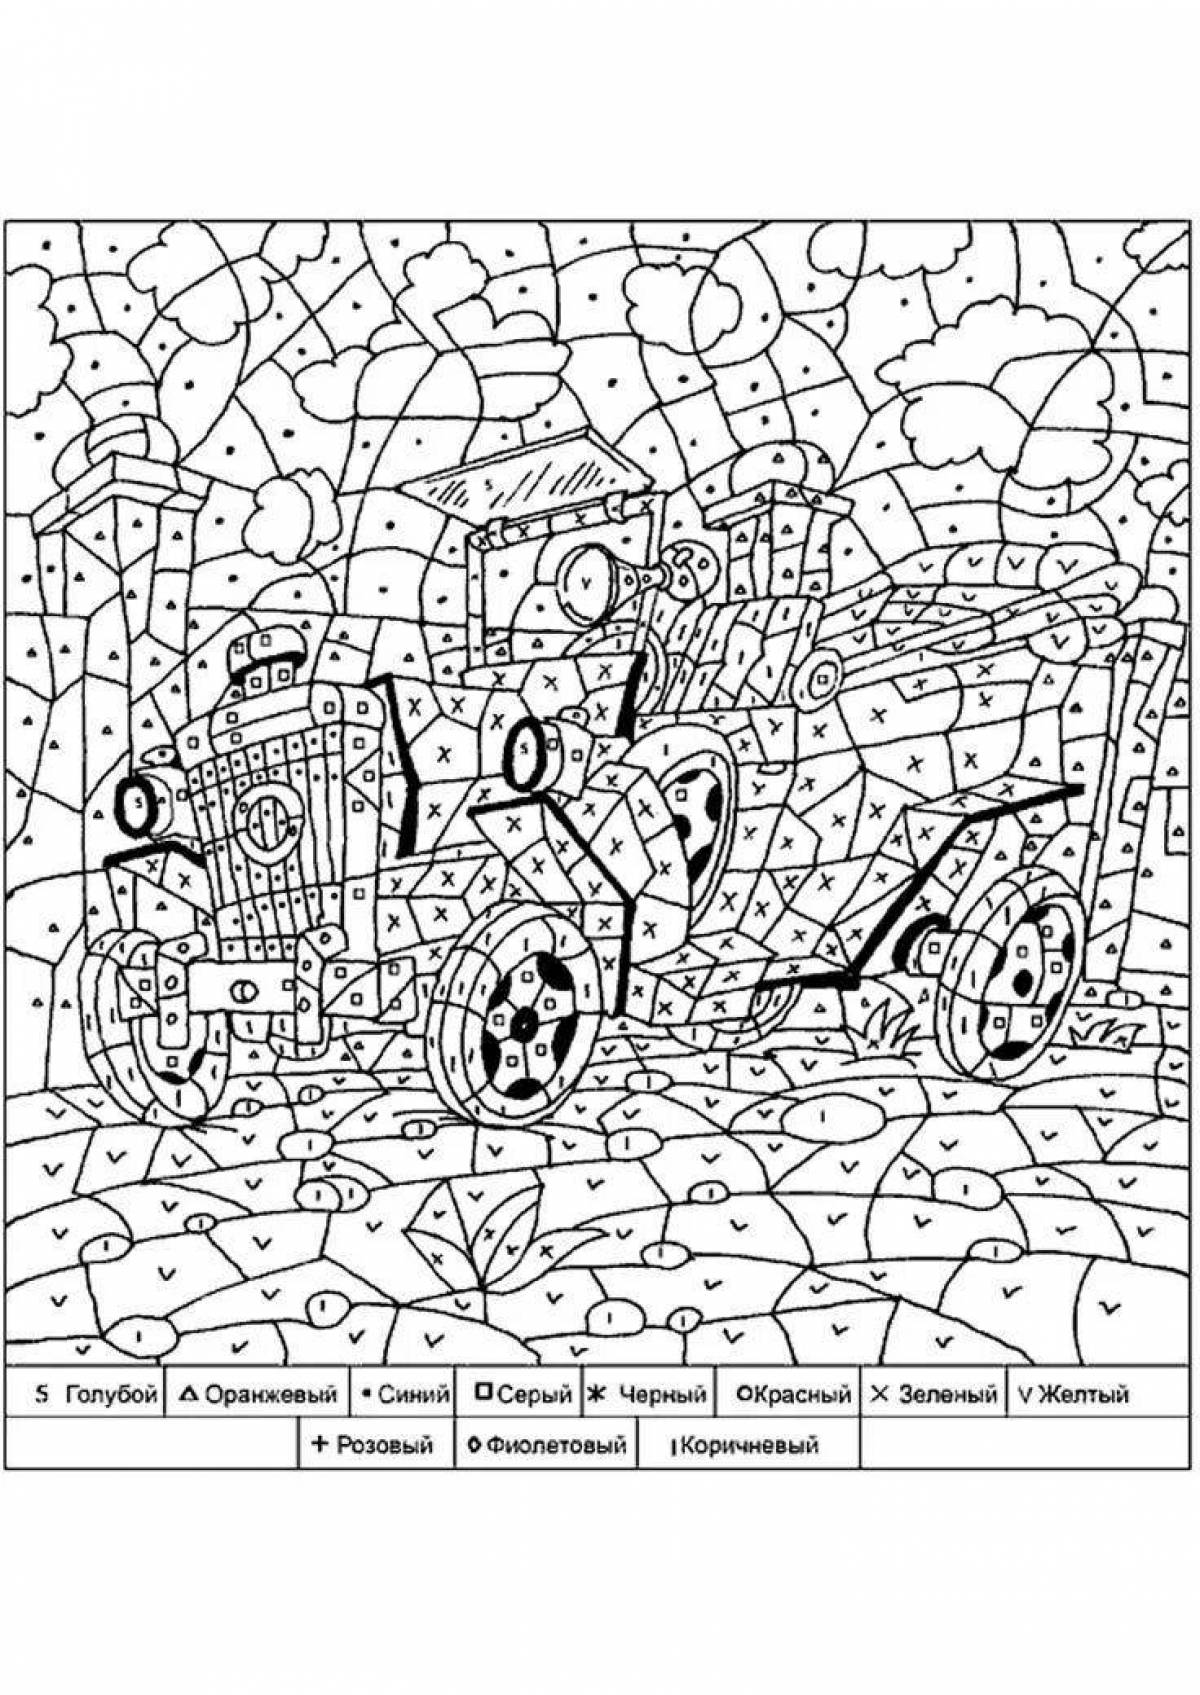 Relaxing coloring book enable coloring by numbers